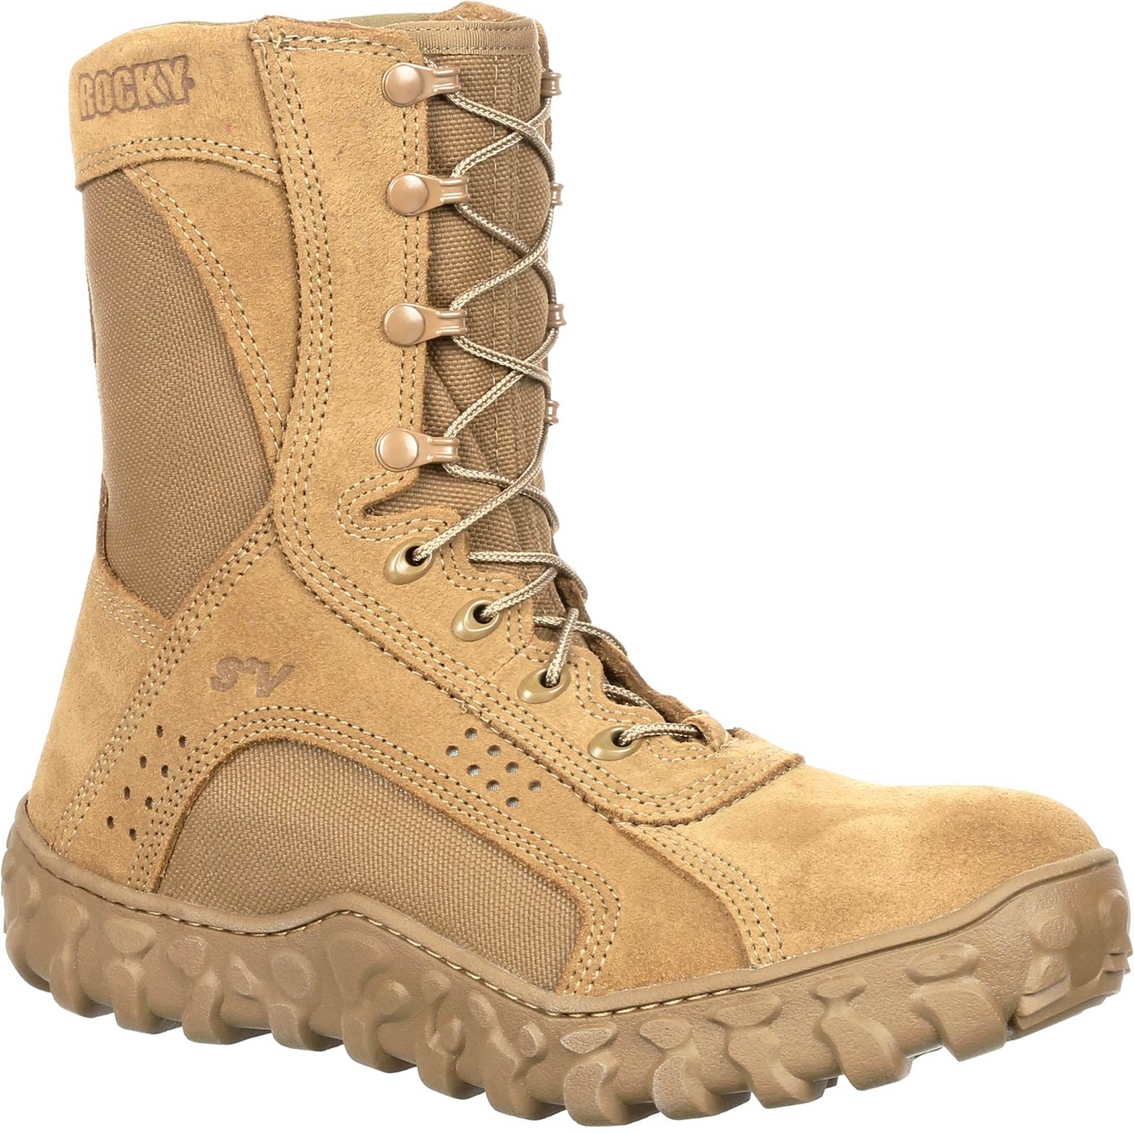 Rocky S2v Steel Toe Tactical Military 